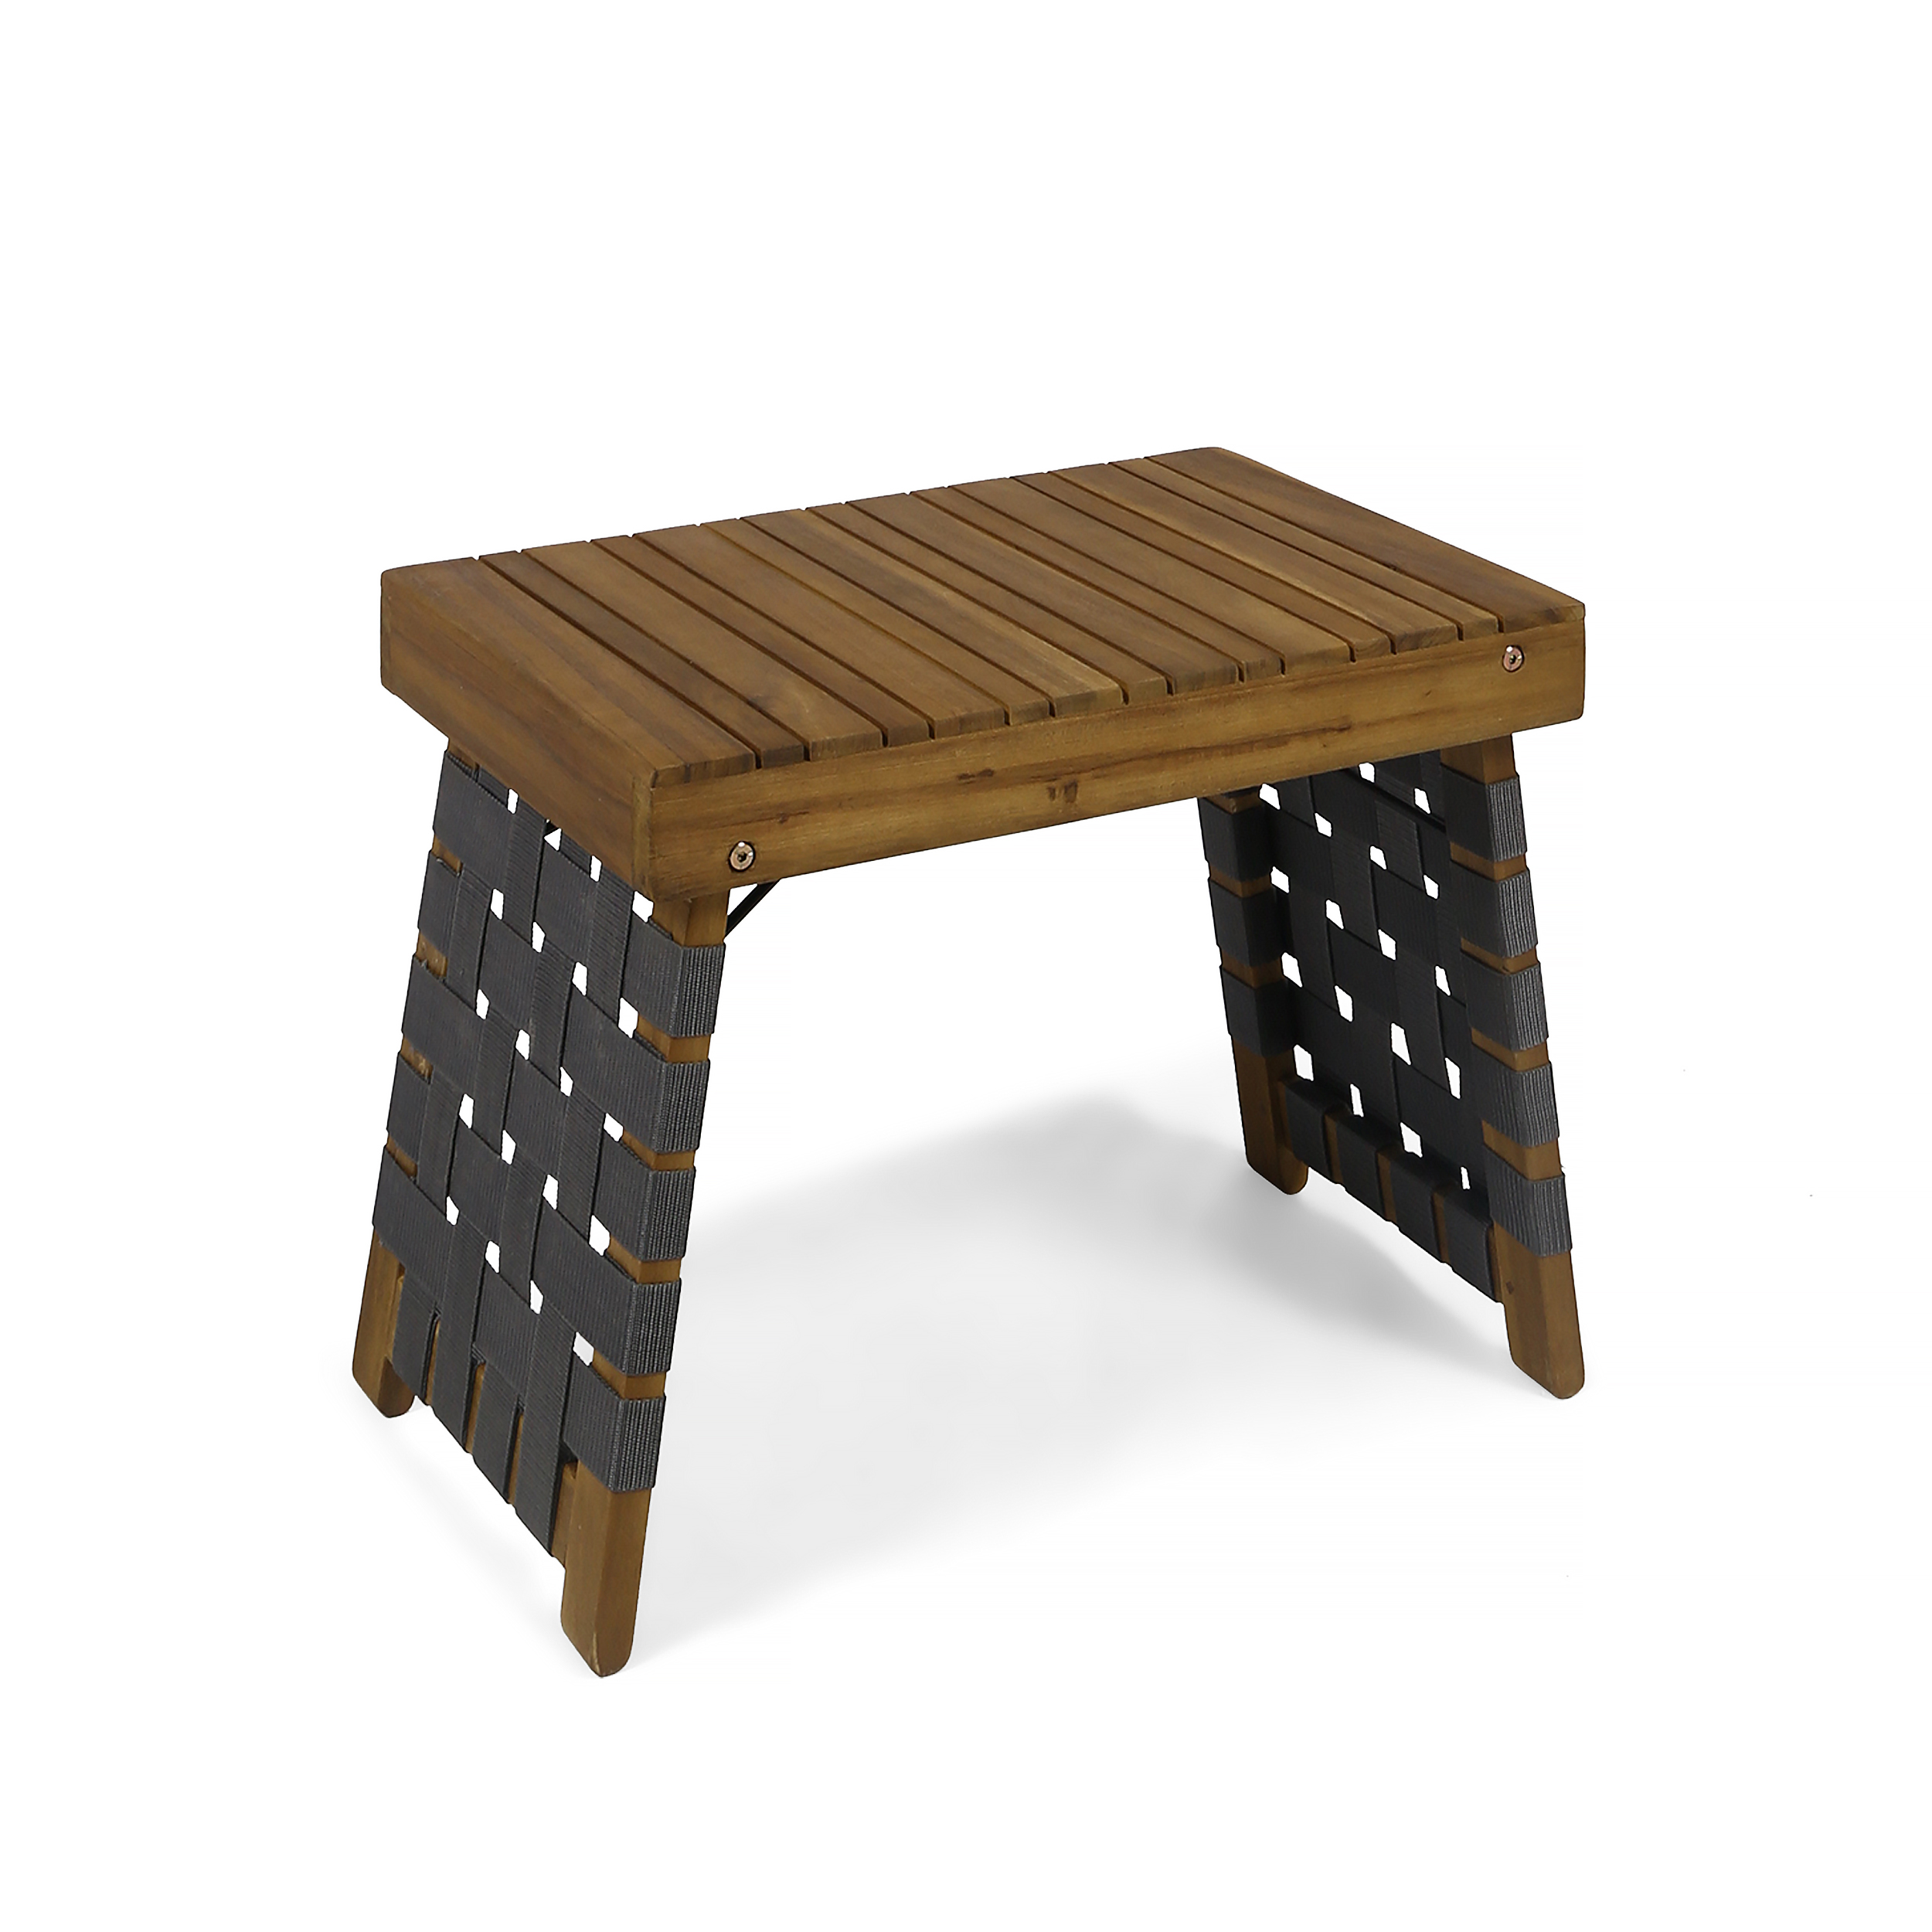 Bezalel Outdoor Acacia Wood Foldable Side Table, Brown Patina and Gray - image 3 of 5